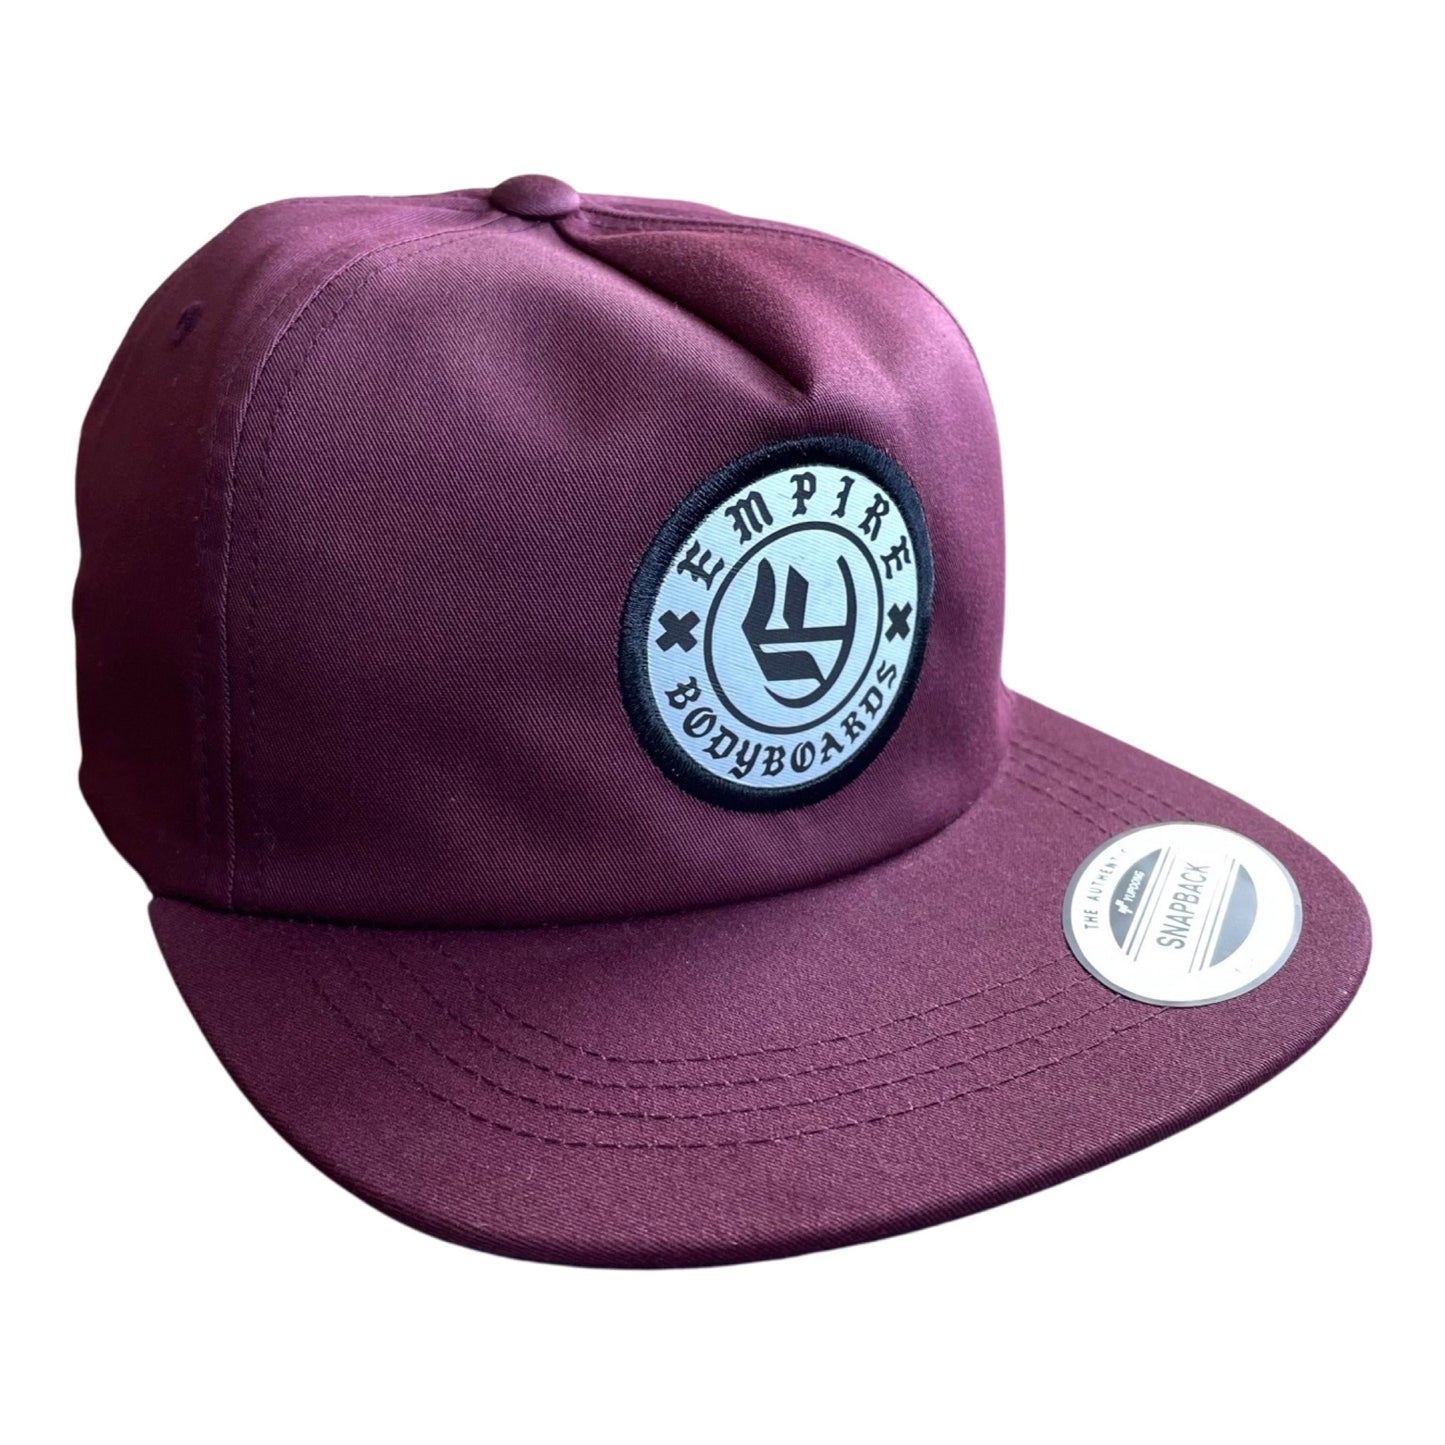 Empire Unstructured Snapback - Maroon